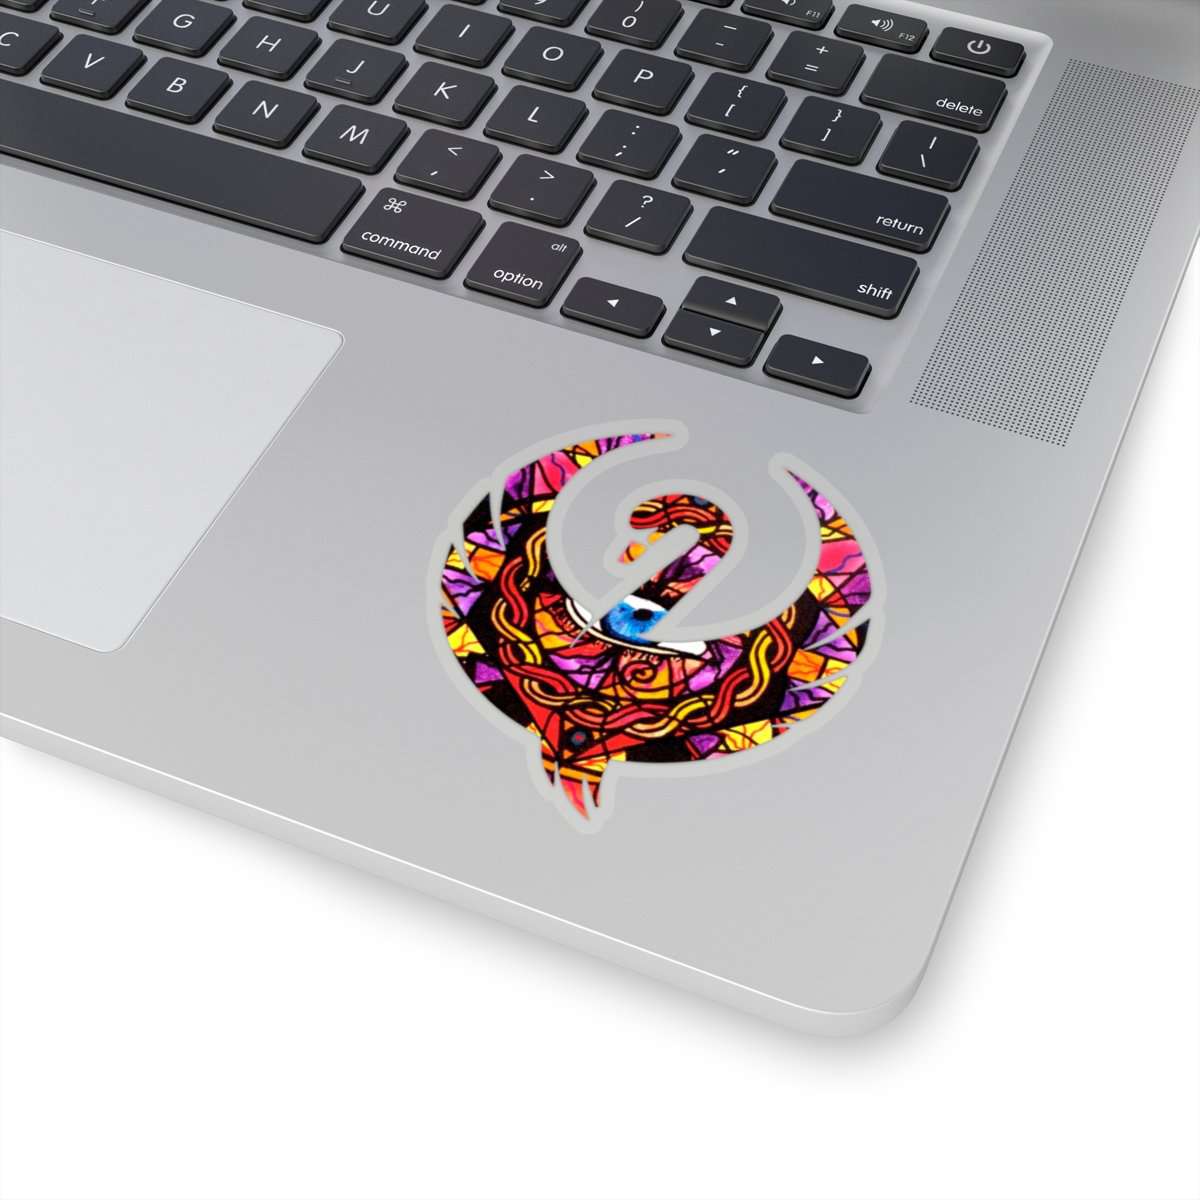 purchase-confident-self-expression-swan-stickers-hot-on-sale_5.jpg